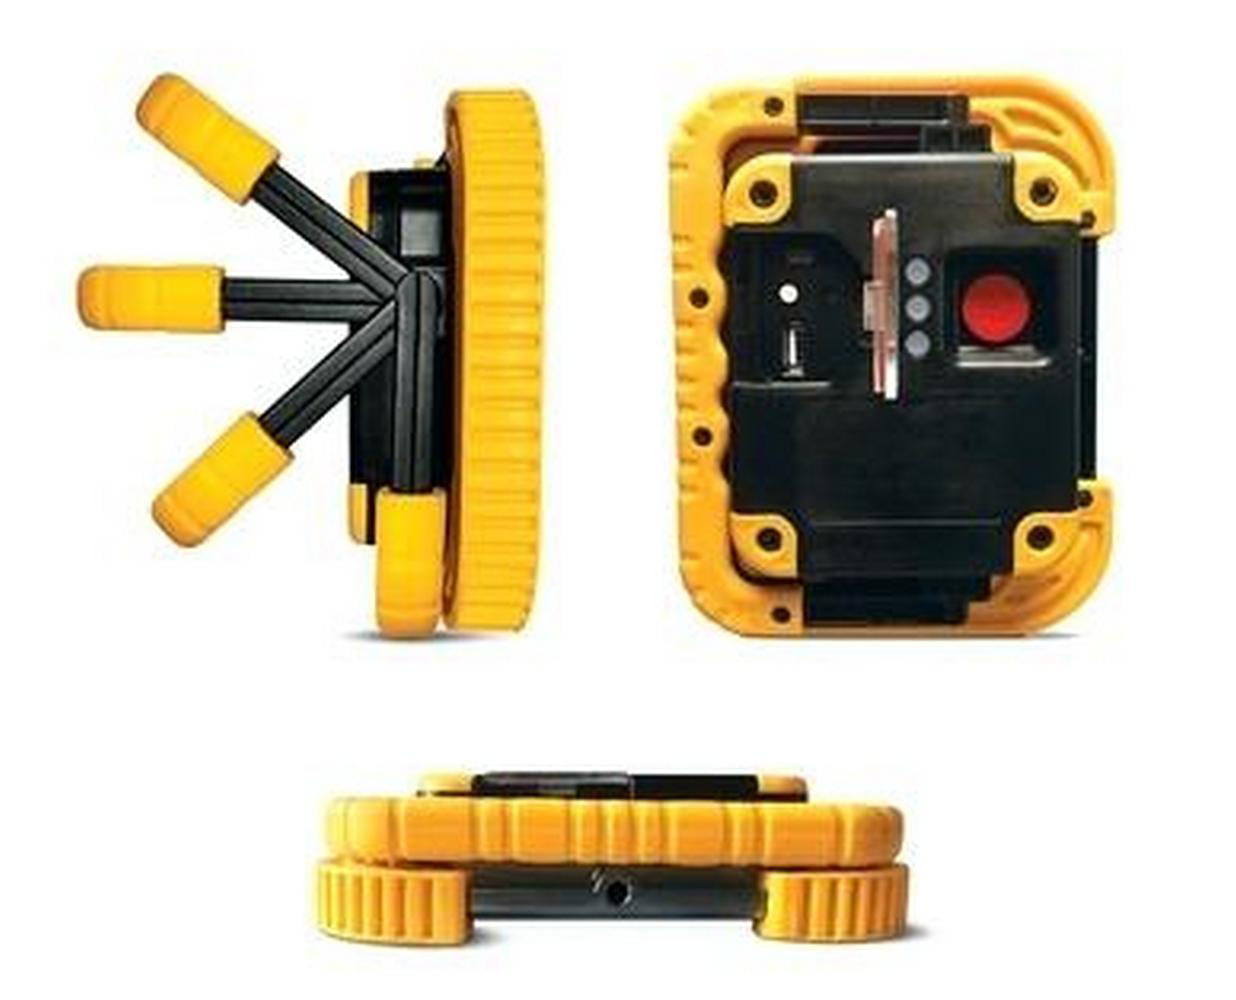 Magnetic 2 Pack CAT LED Work Lights 500 Lumens Rugged Rotating Handle 